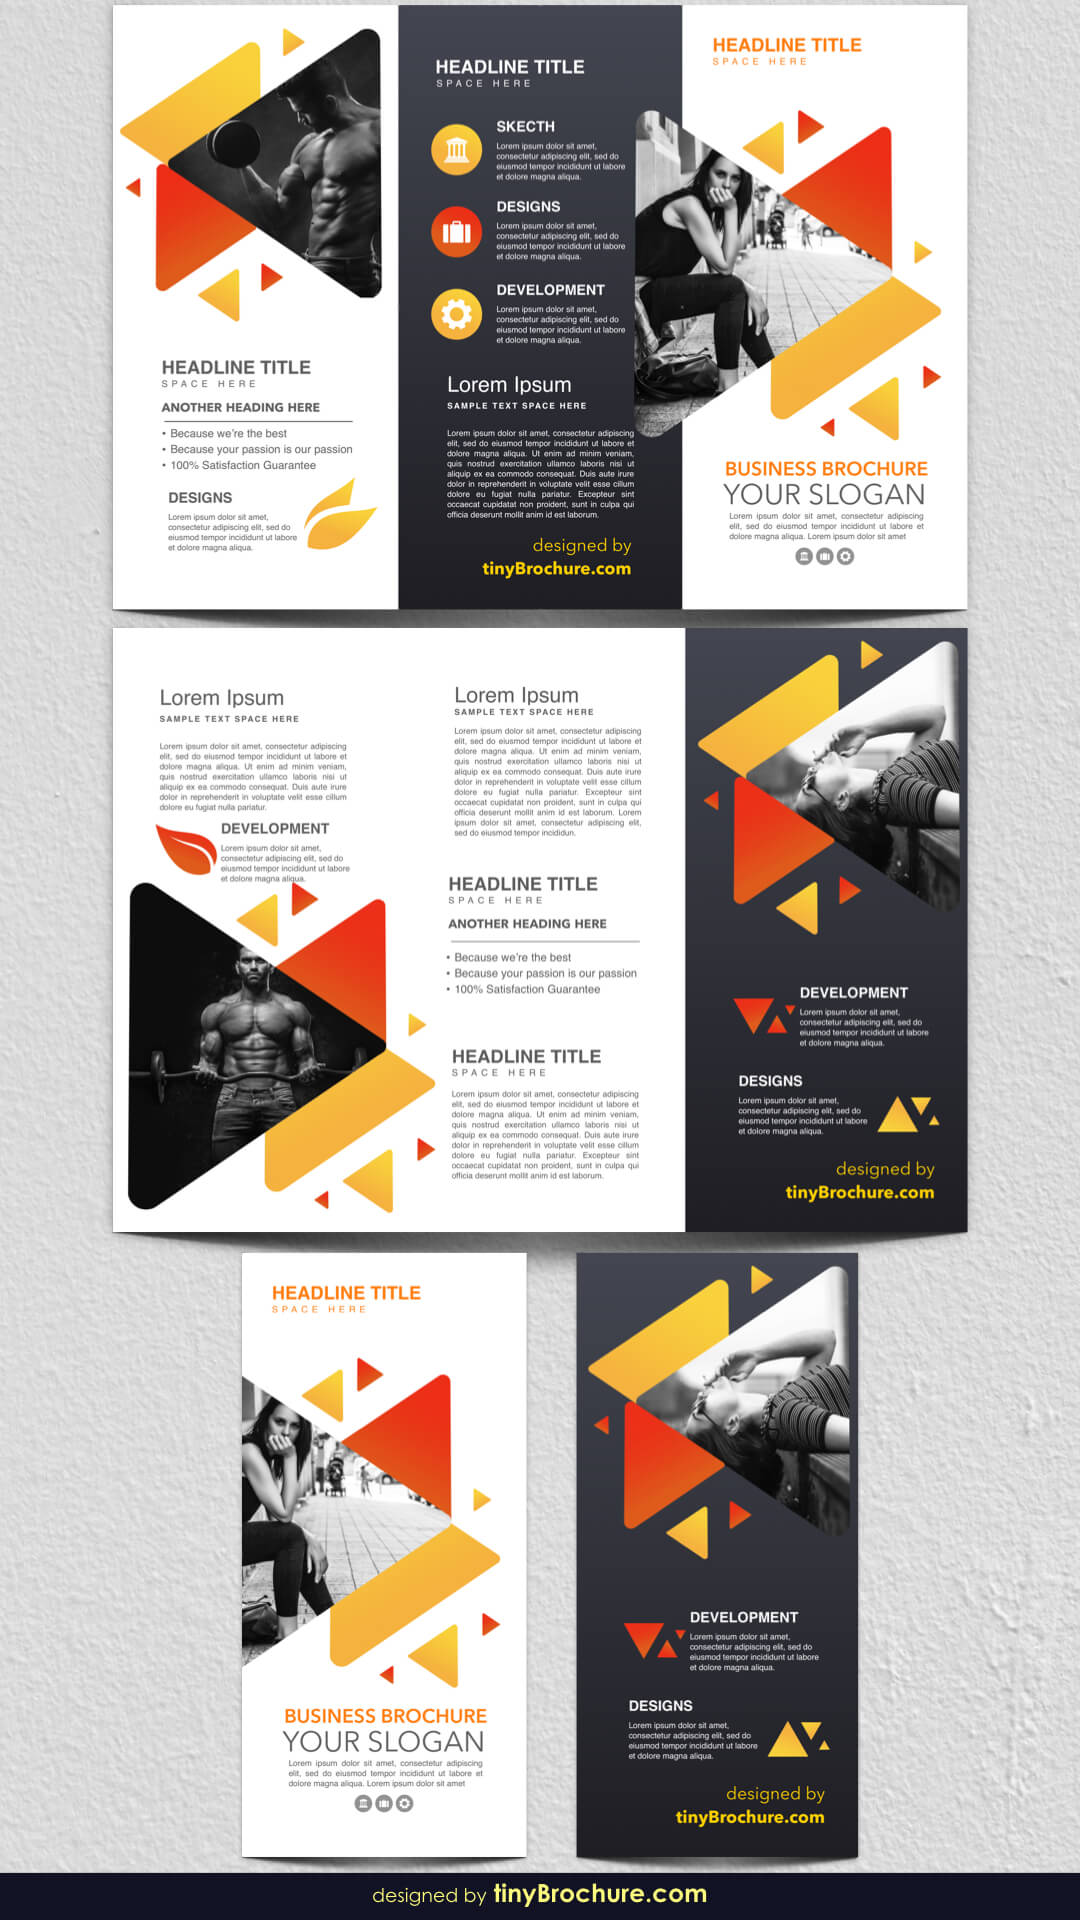 014 Brochure Templates For Google Docs Template Breathtaking Pertaining To Free Online Tri Fold Brochure Template